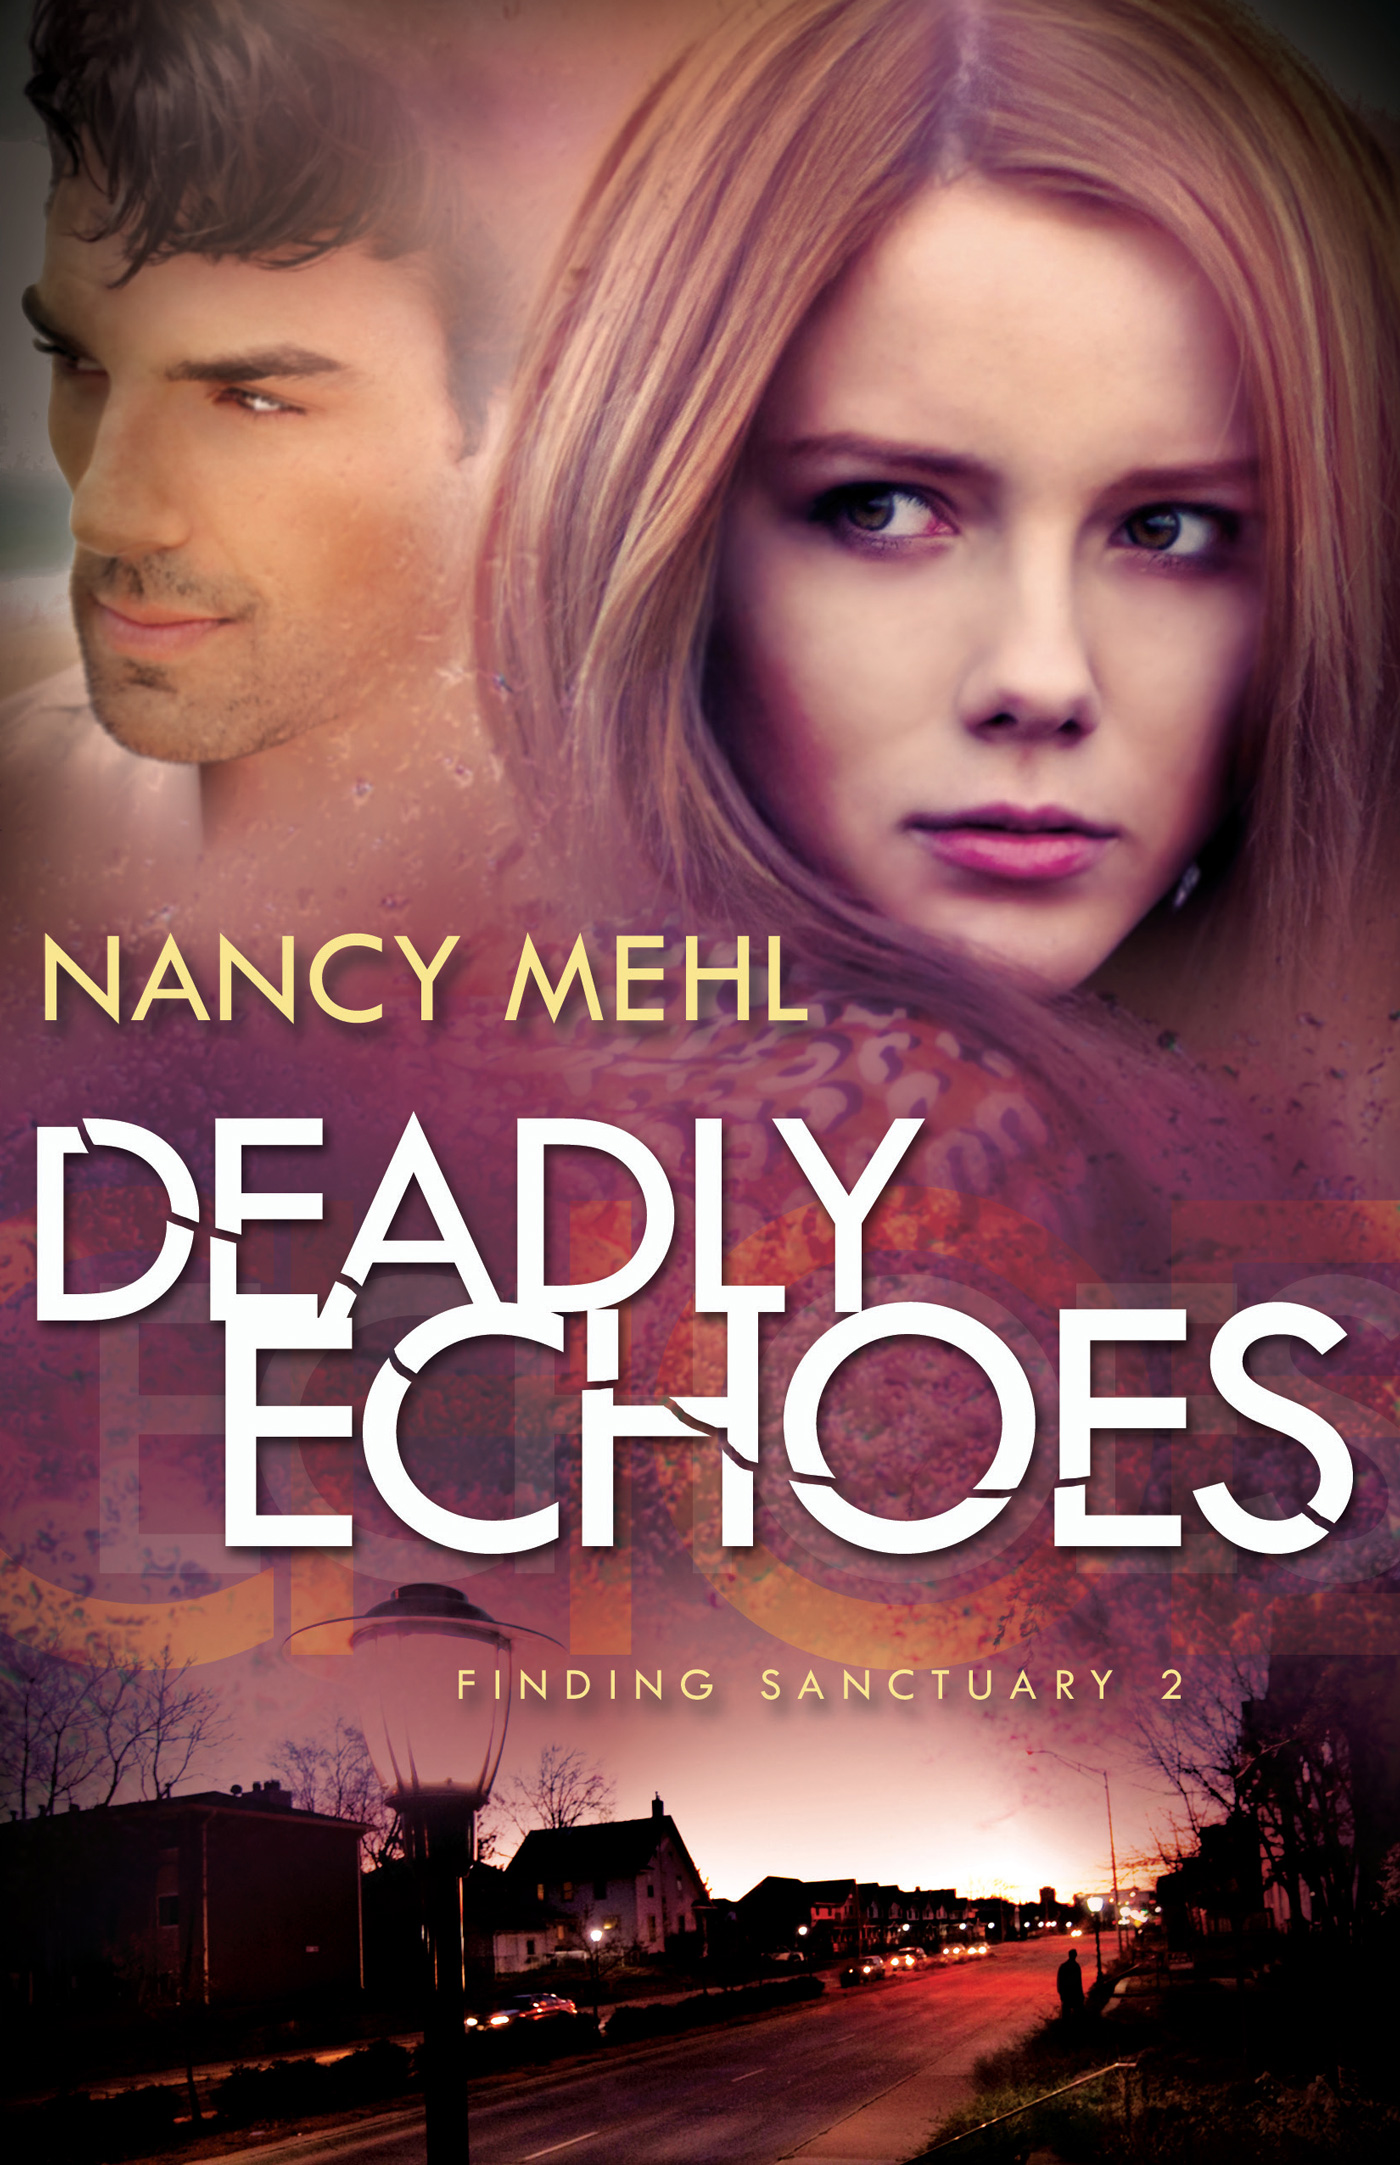 Deadly Echoes (2014) by Nancy Mehl